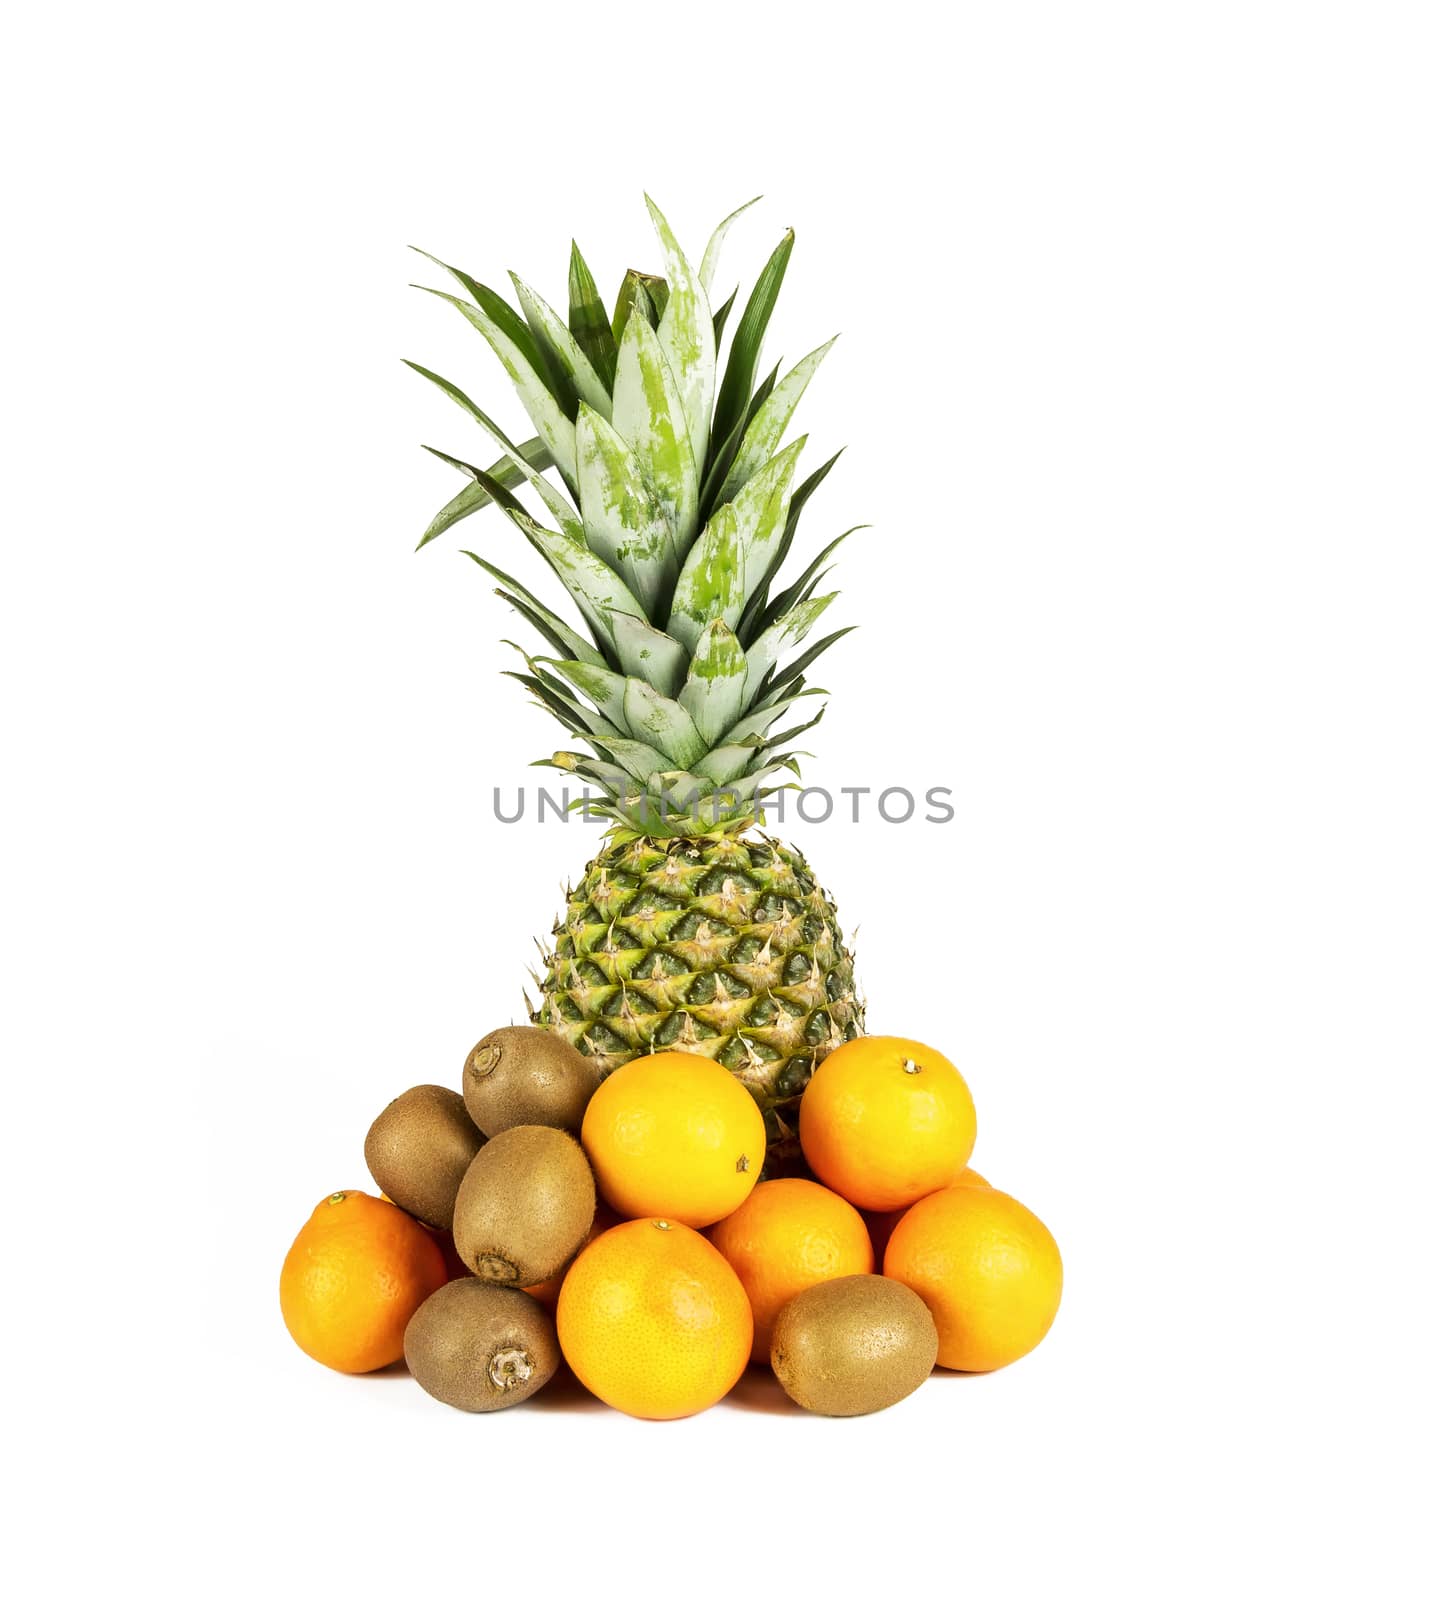 Several tropical fruits lie in a group on a white background by Grommik